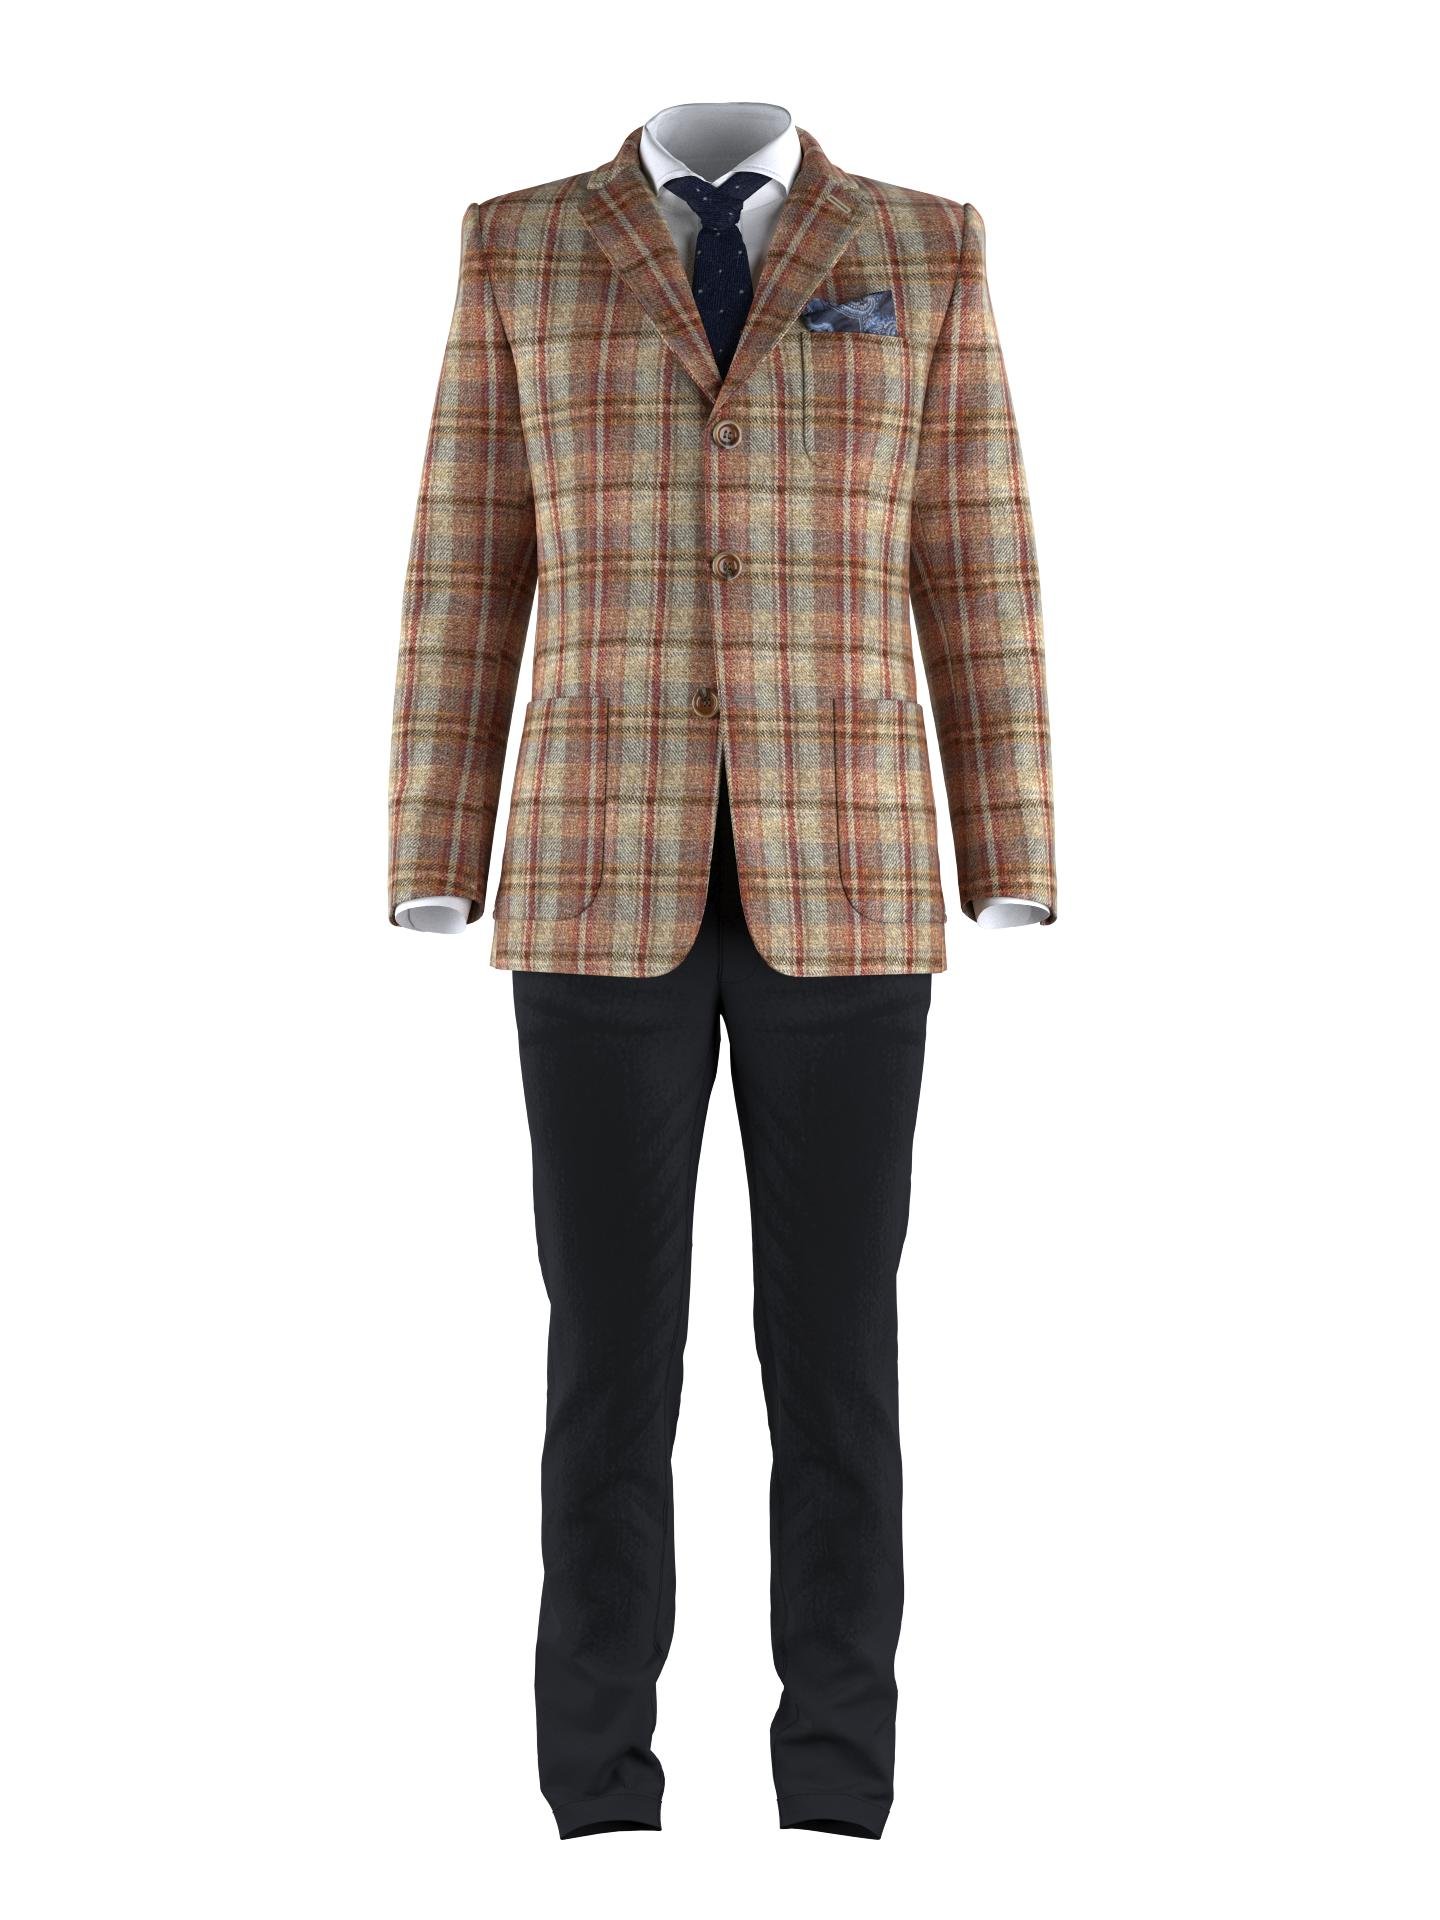 Smart tweed jacket and pants by SUITCON